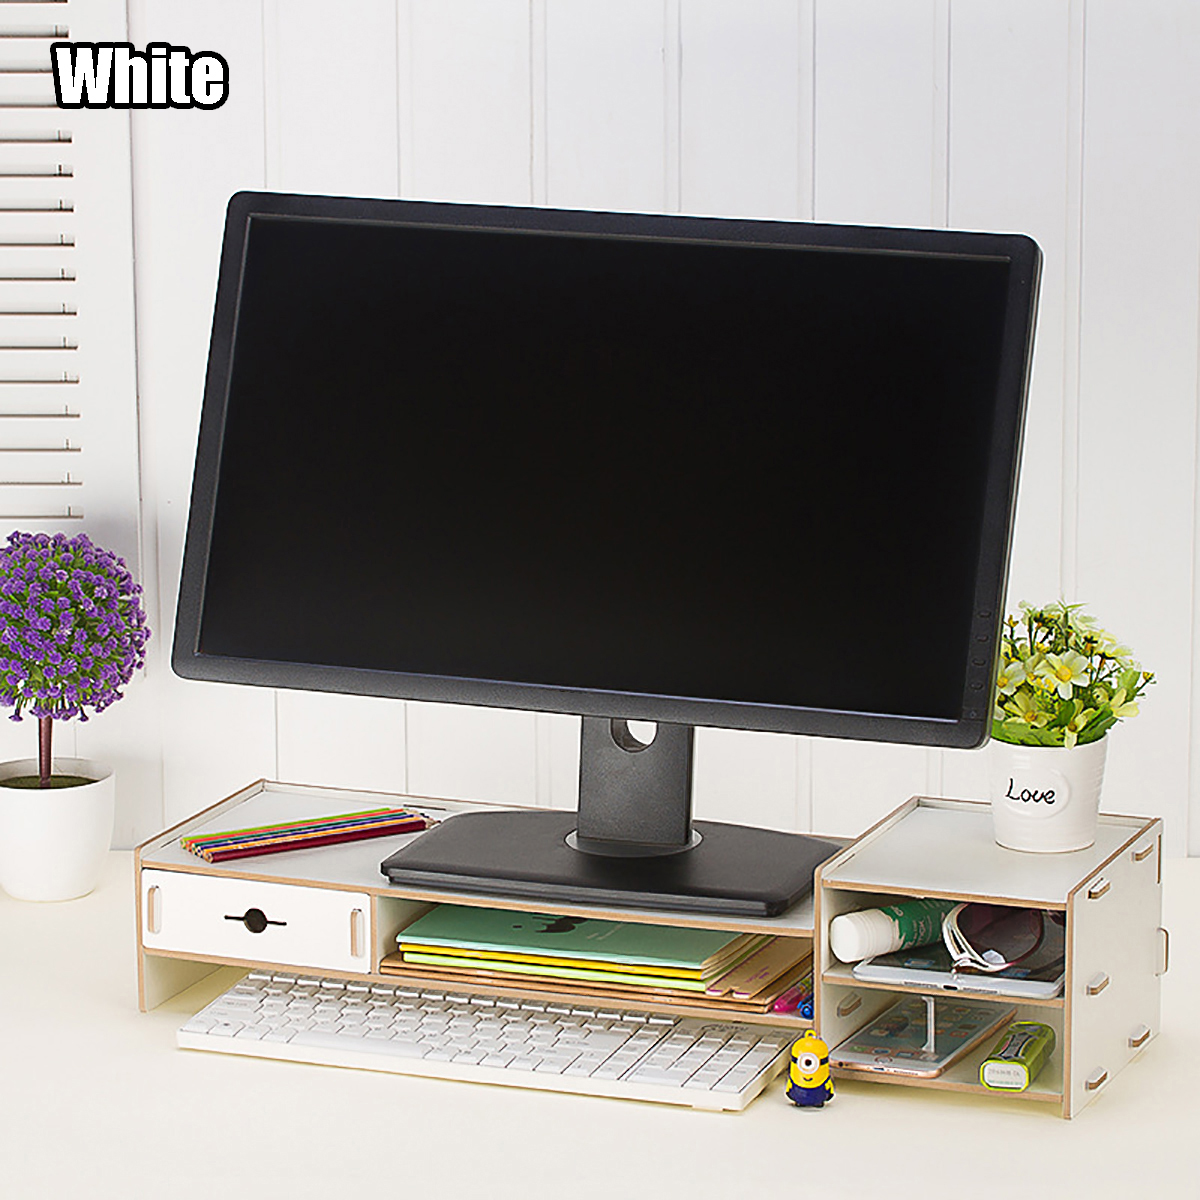 Wooden-Monitor-Stand-Desktop-Computer-Riser-LED-LCD-Monitor-Laptop-Notebook-Support-Stationery-Holde-1757935-5